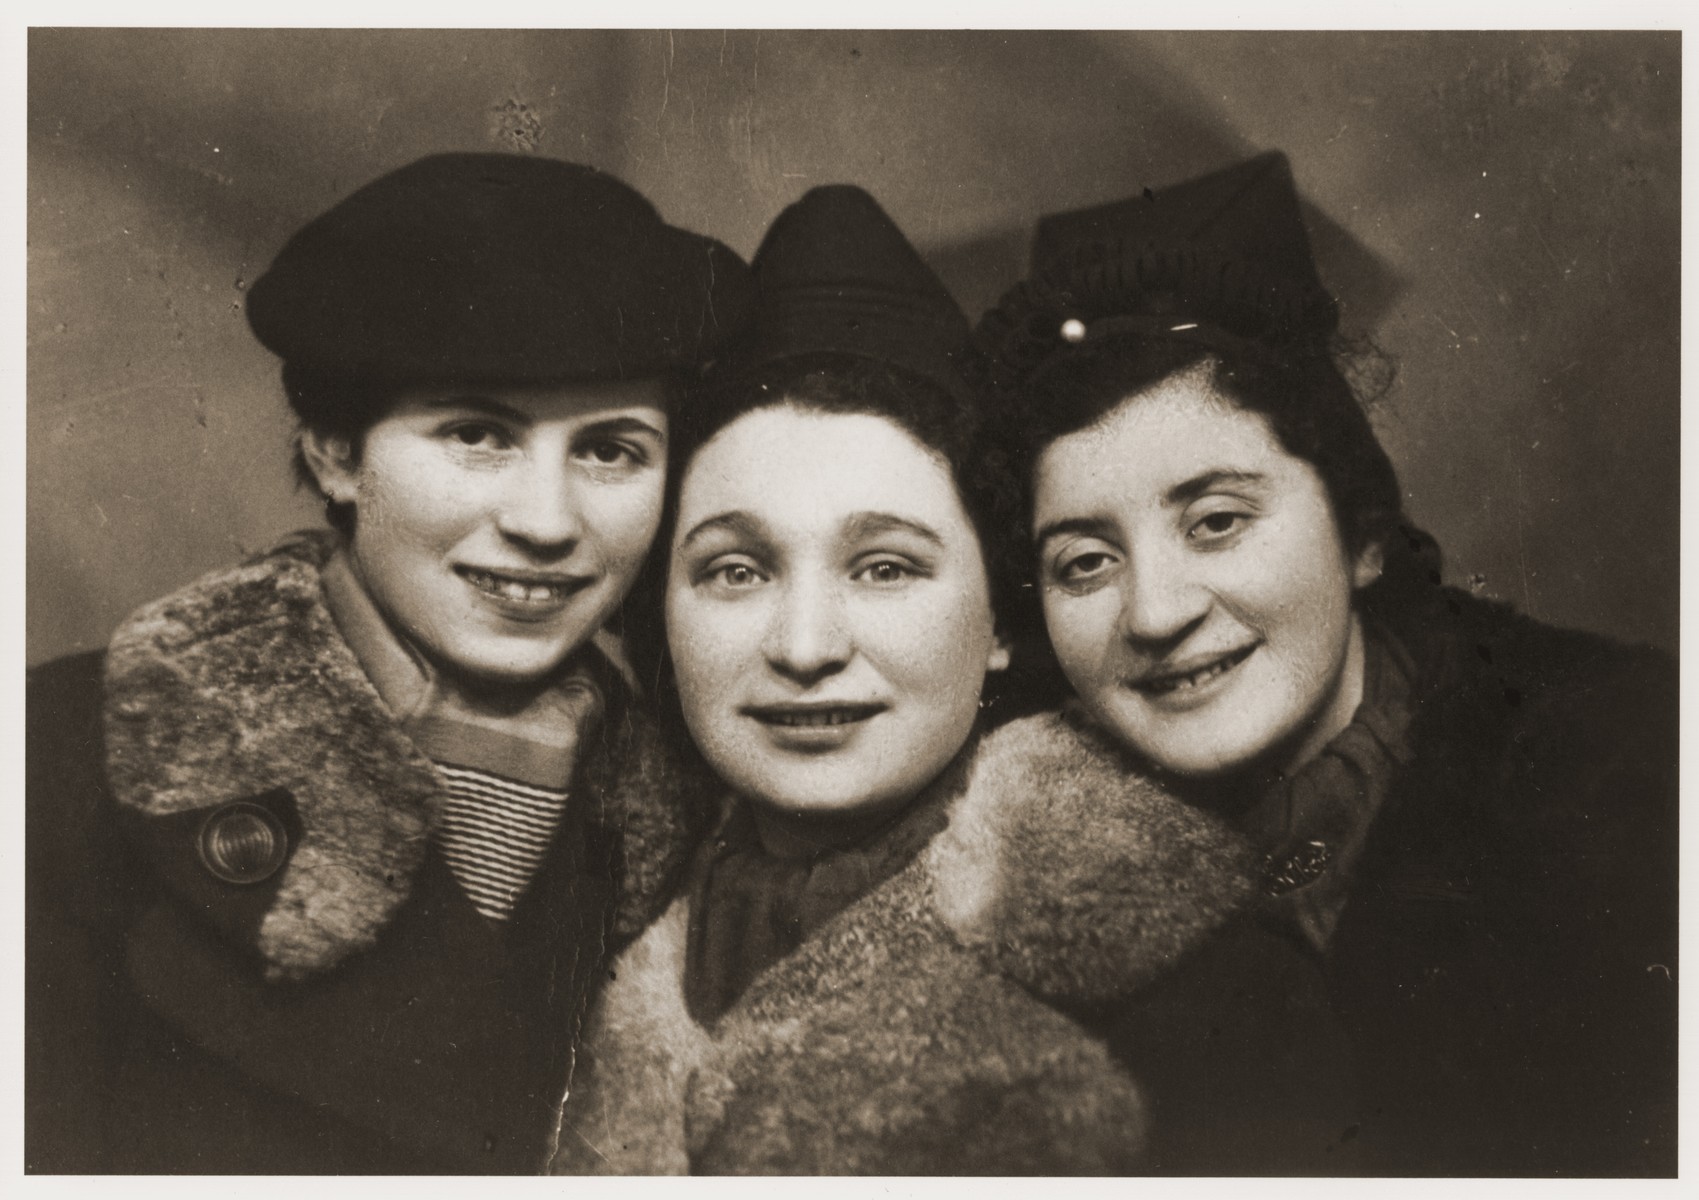 Studio portrait of three Jewish girlfriends in Kalisz, Poland.

Among those pictured is Elli Grinberg.